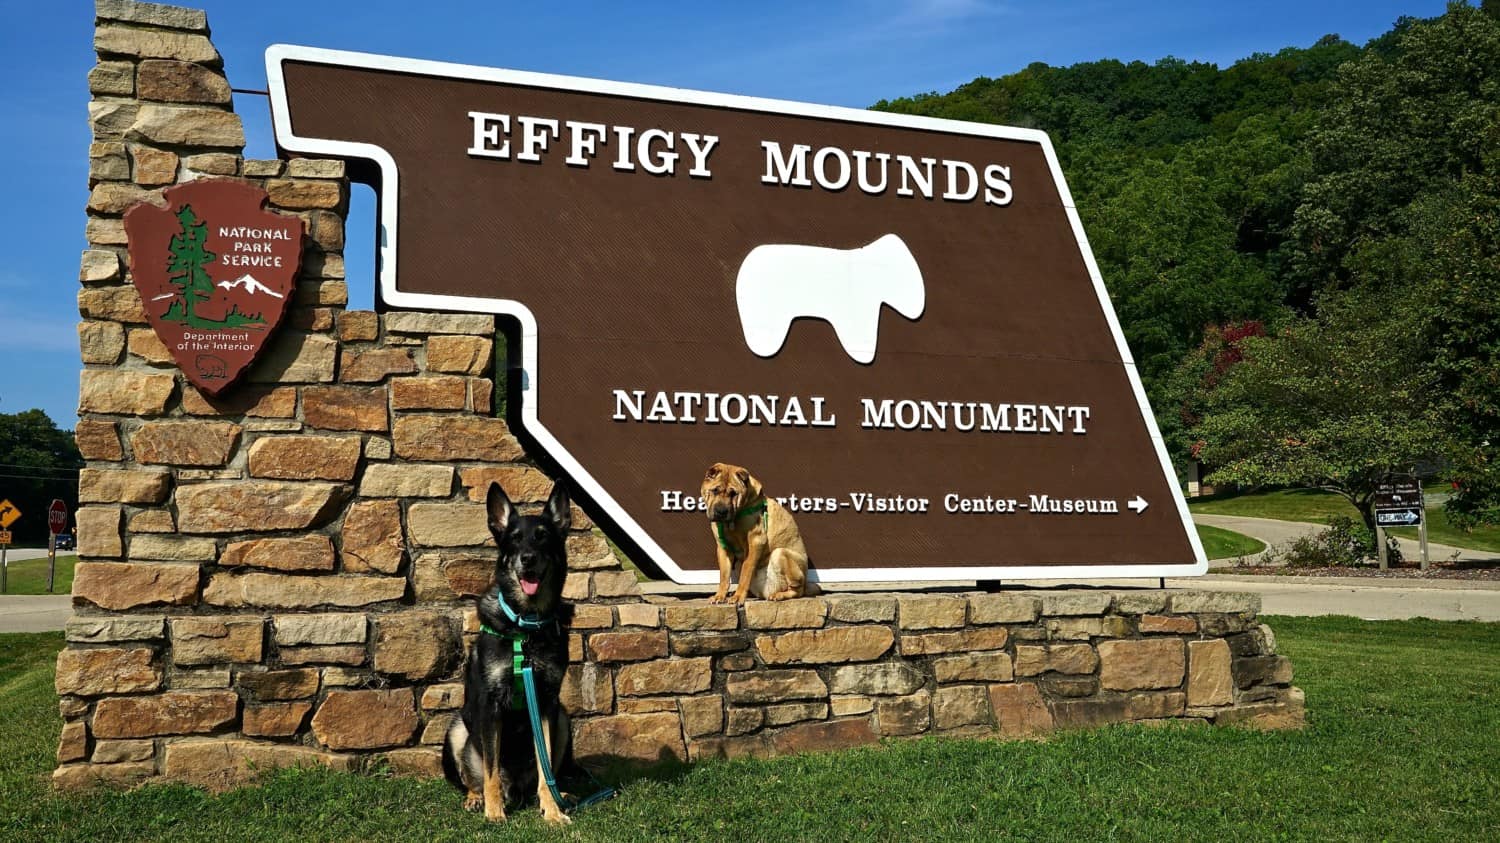 German Shepherd and Shar Pei dogs pose as a pet at the Effigy Mounds National Monument in Harpers Ferry, IA